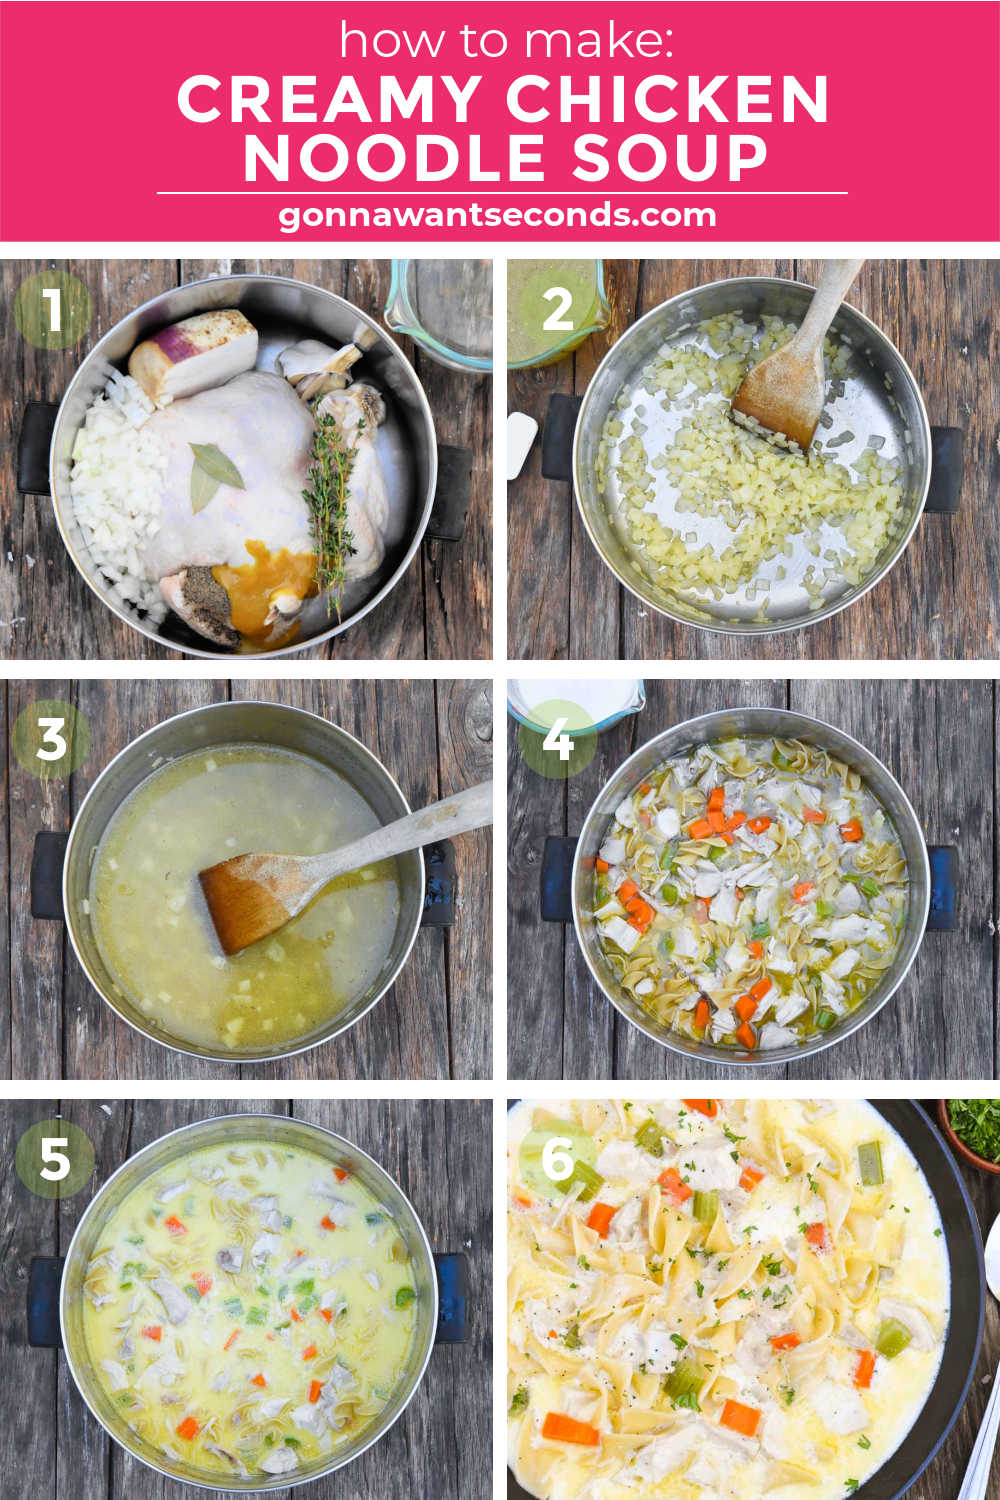 Step by step how to make creamy chicken noodle soup